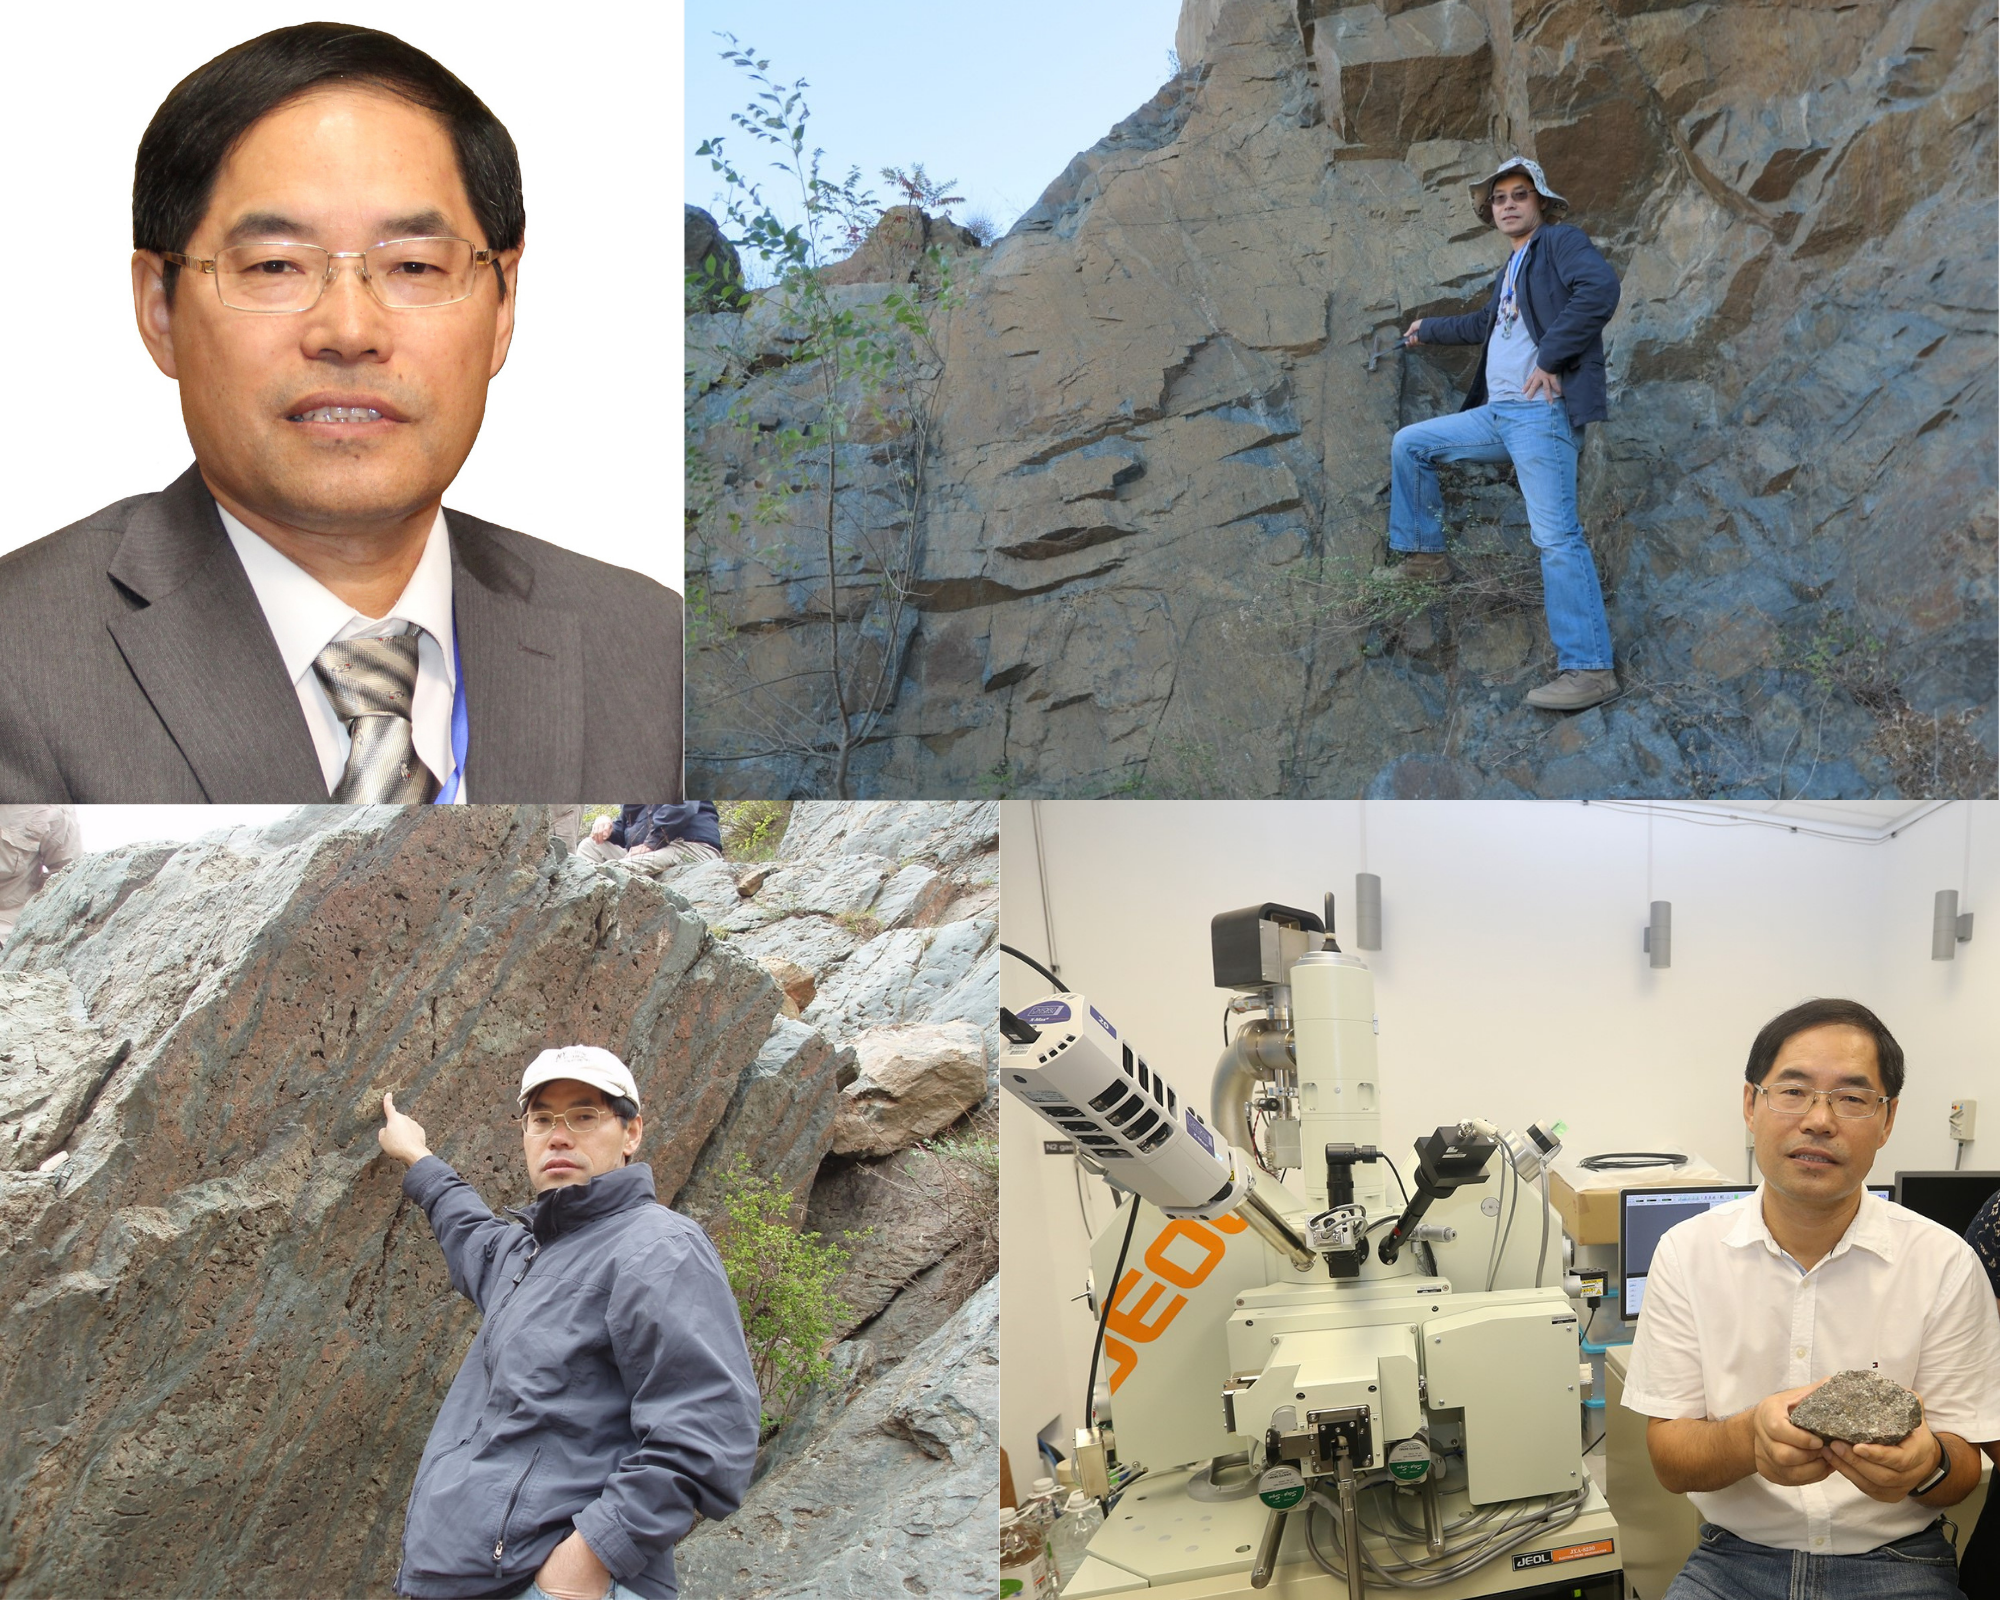 HKU geologist Professor Guochun Zhao elected as Fellow of The World Academy of Sciences (TWAS) for the Advancement of Science in Developing Countries